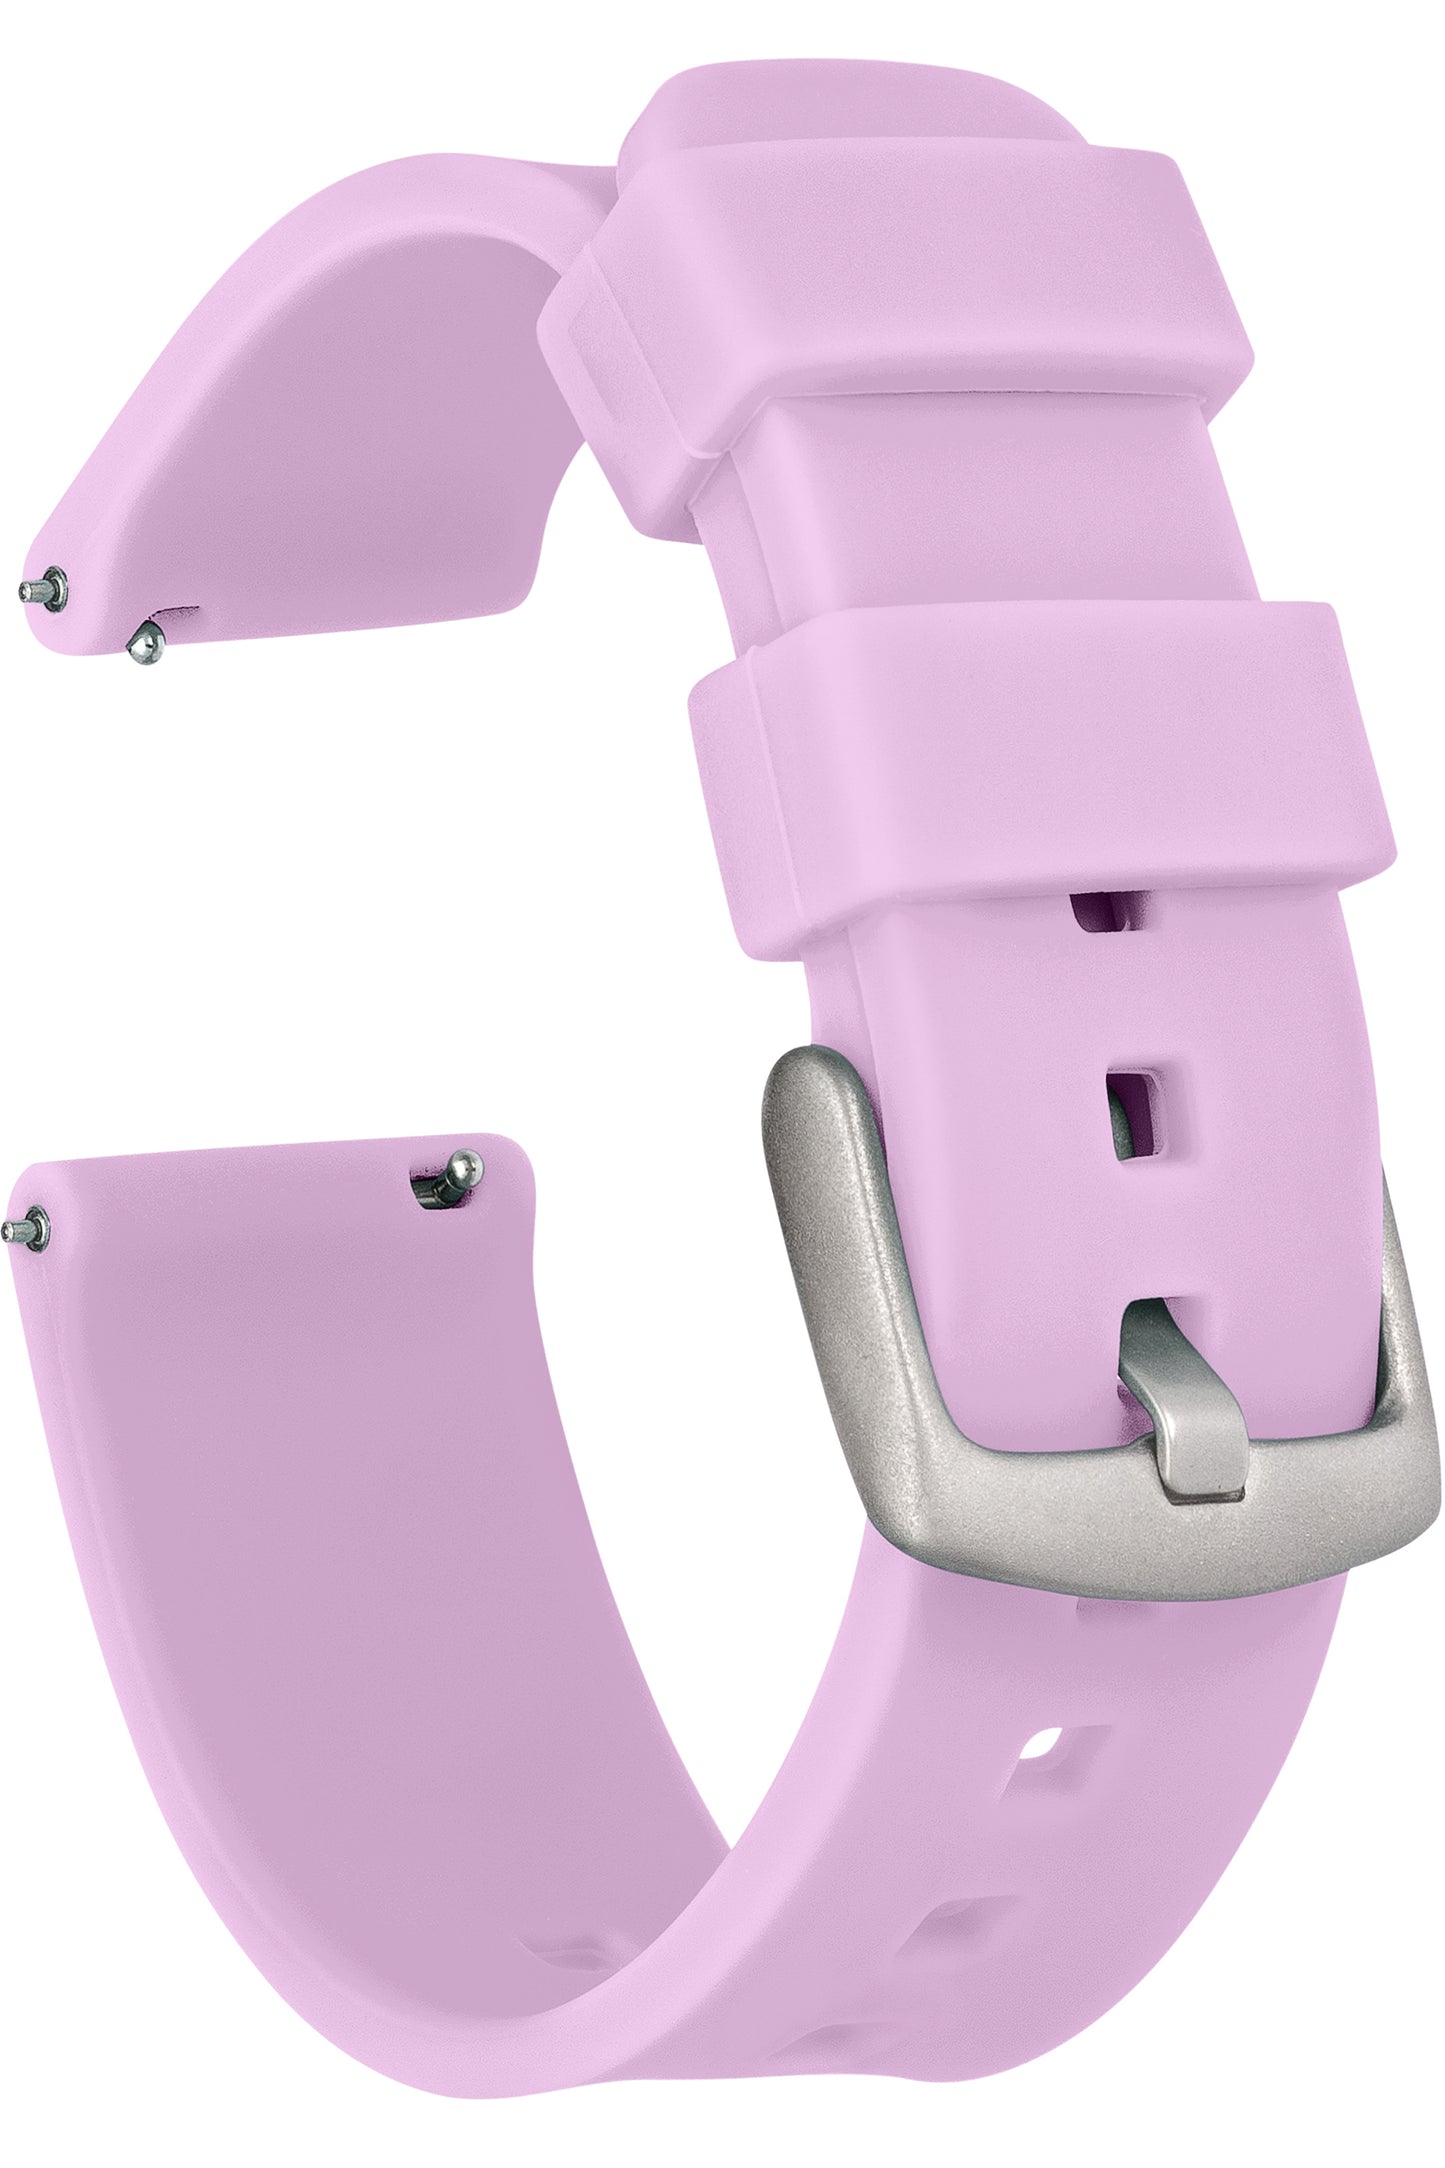 Silicone Watchband - 16mm with Quick Release